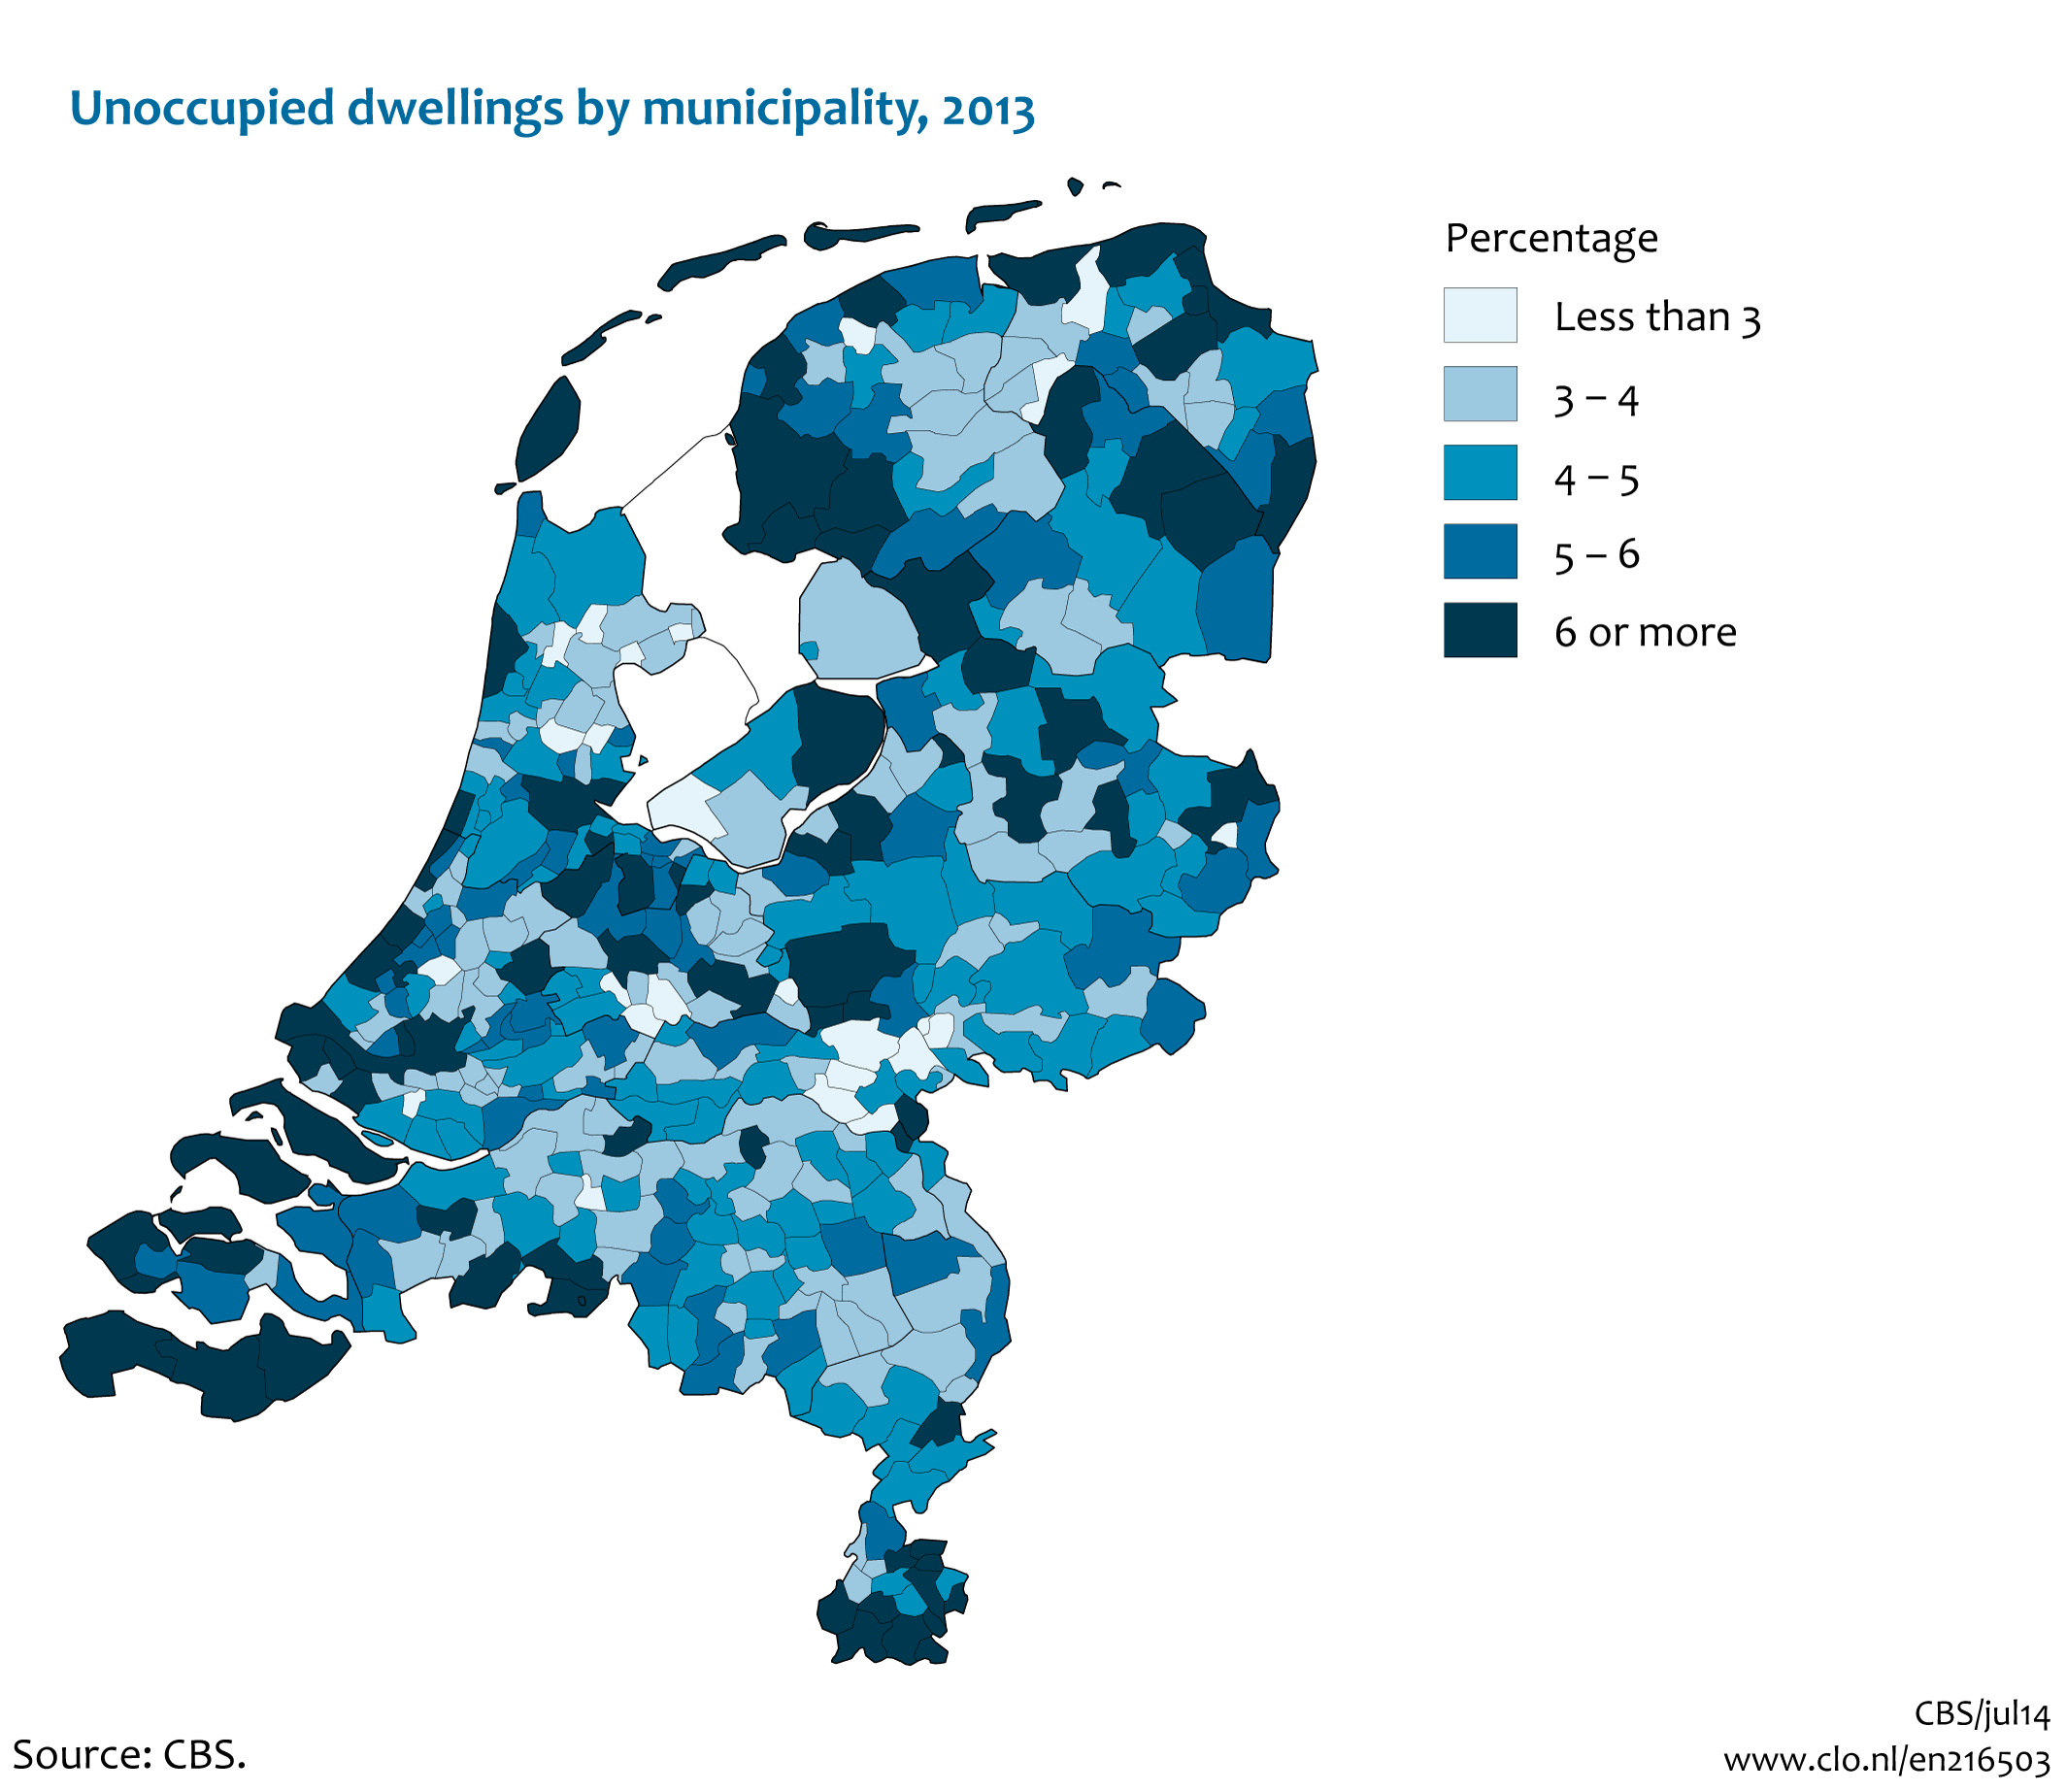 Image Unoccupied dwellings by municipality, 2013. The image is further explained in the text.